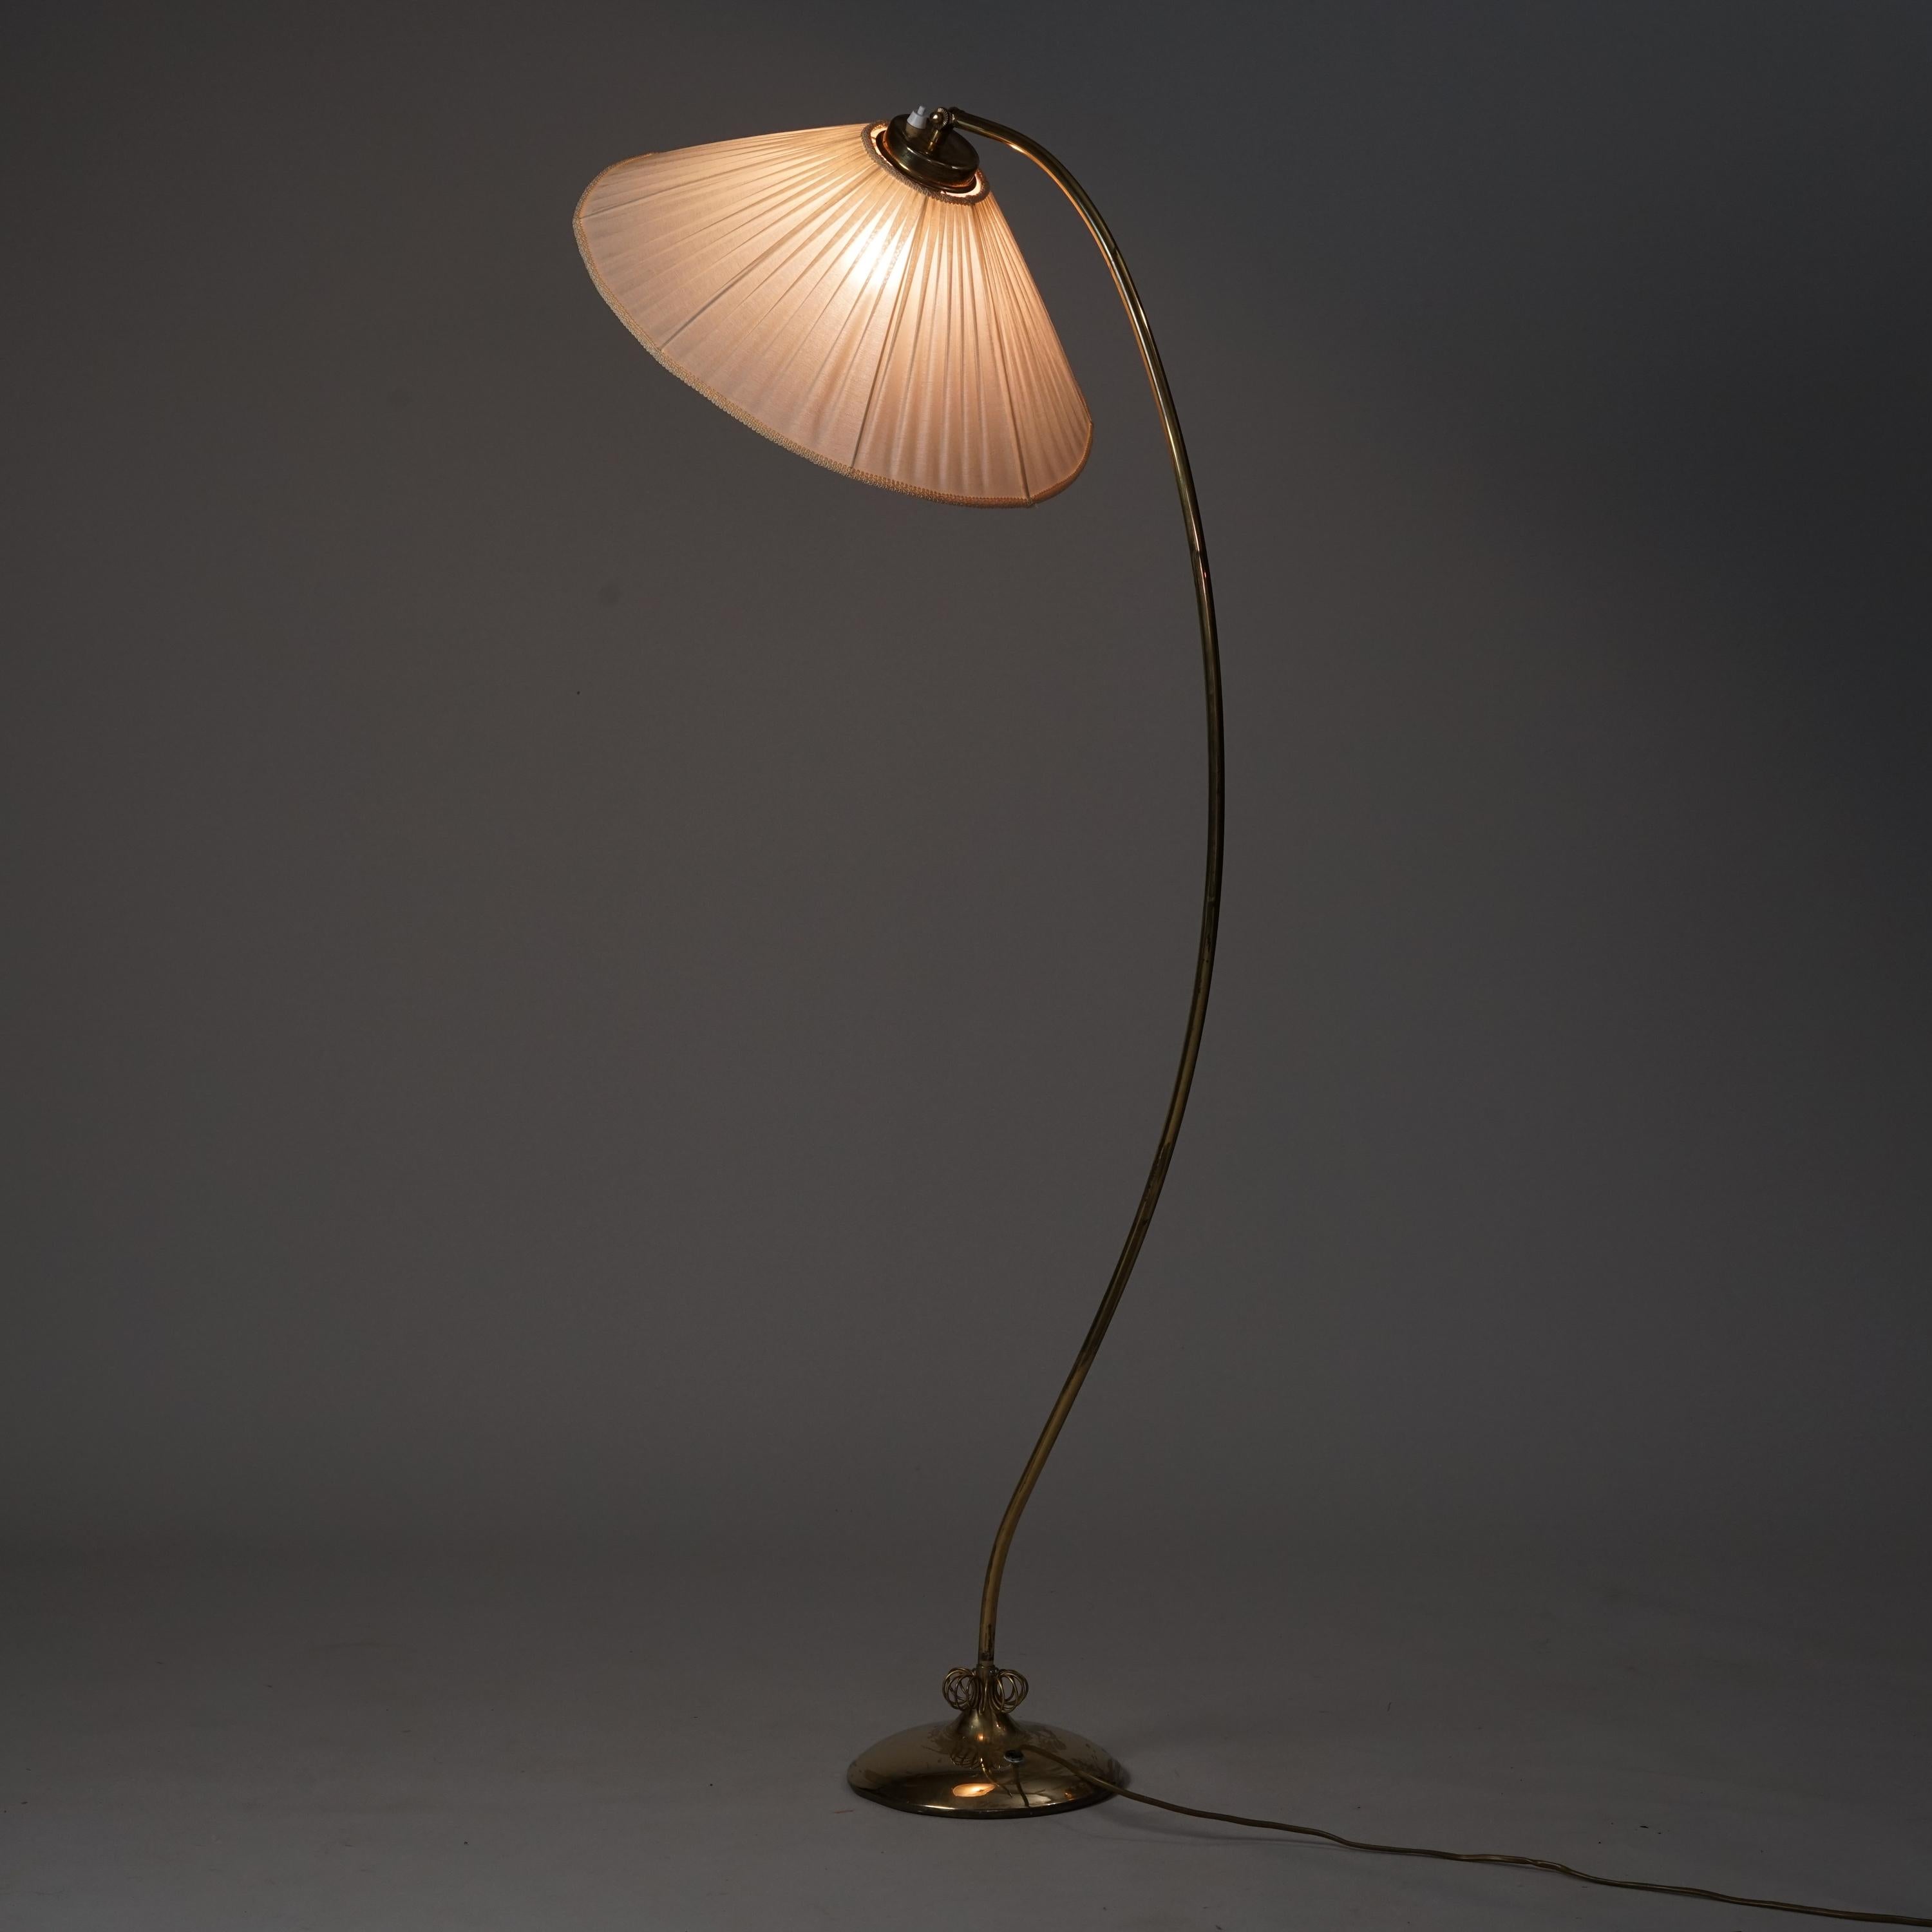 Floor Lamp, manufactured by V.Soini Oy, Finland, 1950s. Brass with silk lamp shade. Classic style Scandinavian Modern floor lamp. Good vintage condition, minor patina consistent with age and use. 



